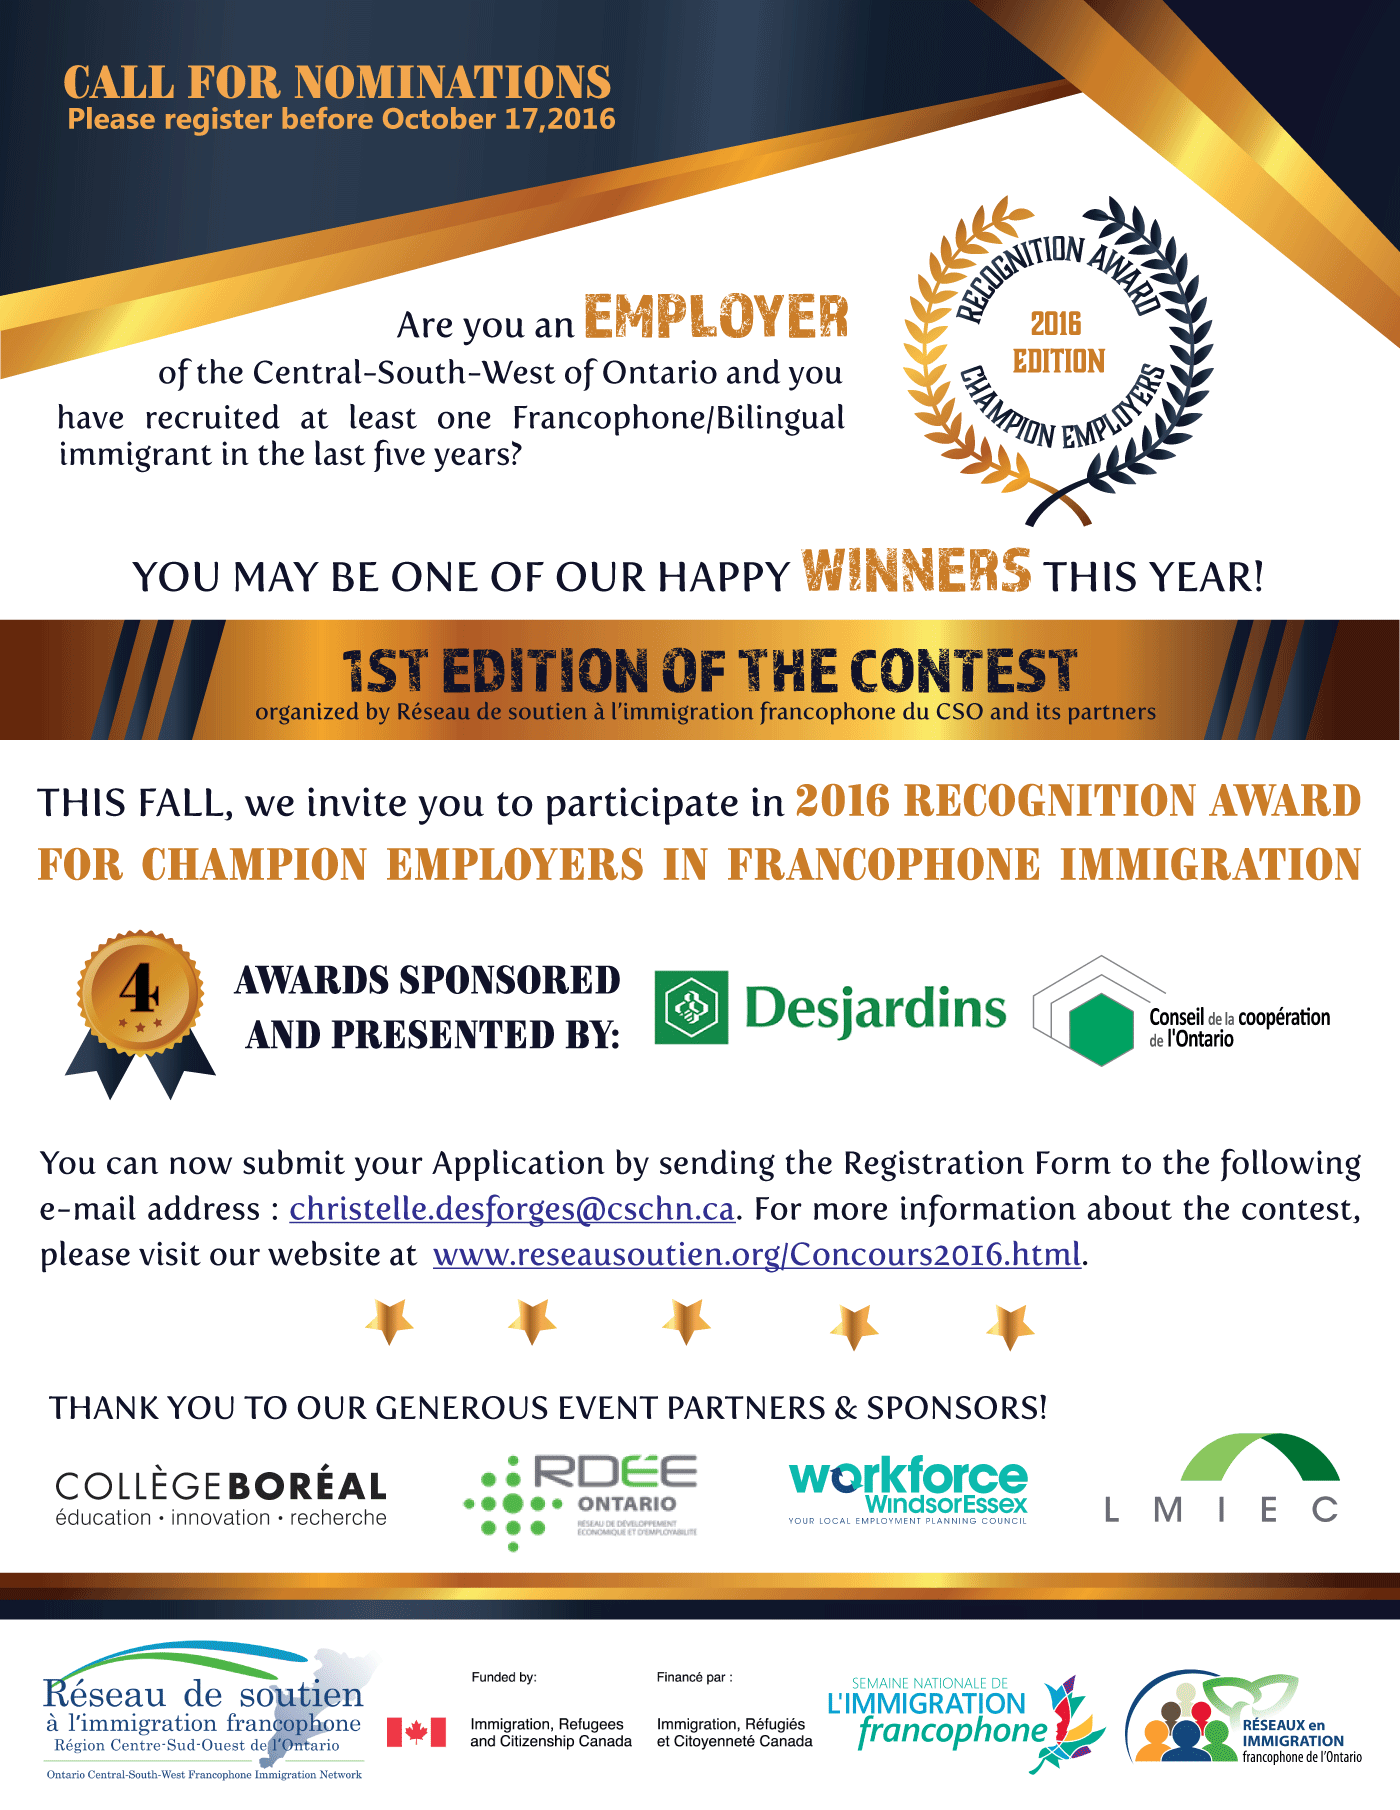 CALL FOR NOMINATIONS Please register before October 17,2016 Are you an employers of the Central-South-West of Ontario and you have recruited at least one Francophone/Bilingual immigrant in the last five years? Recognition Award - 2016 Edition YOU MAY BE ONE OF OUR HAPPY WINNERS THIS YEAR! 1st Edition of the Contest: organized by Réseau de soutien à l’immigration francophone du CSO and its partners THIS FALL, we invite you to participate in 2016 recognition award for champion Employers in francophone immigration 4 AWARDS sponsored and presented by: Desjardins and Conseil de la coopération de L'Ontario You can now submit your Application by sending the Registration Form to the following e-mail address : christelle.desforges@cschn.ca. For more information about the contest, please visit our website at www.reseausoutien.org/Concours2016.html. THANK YOU TO OUR GENEROUS EVENT PARTNERS & SPONSORS! Collège Boréal - éducation • innovation • recherche RDÉE ONTARIO Workforce Windsor Essex LMIEC Réseau de soutien à l'immigration francophone funded by: Immigration, Refugees and Citizenship Canada. Semaine nationale de l'immigration francophone Réseaux en Immigration francophone de l'Ontario